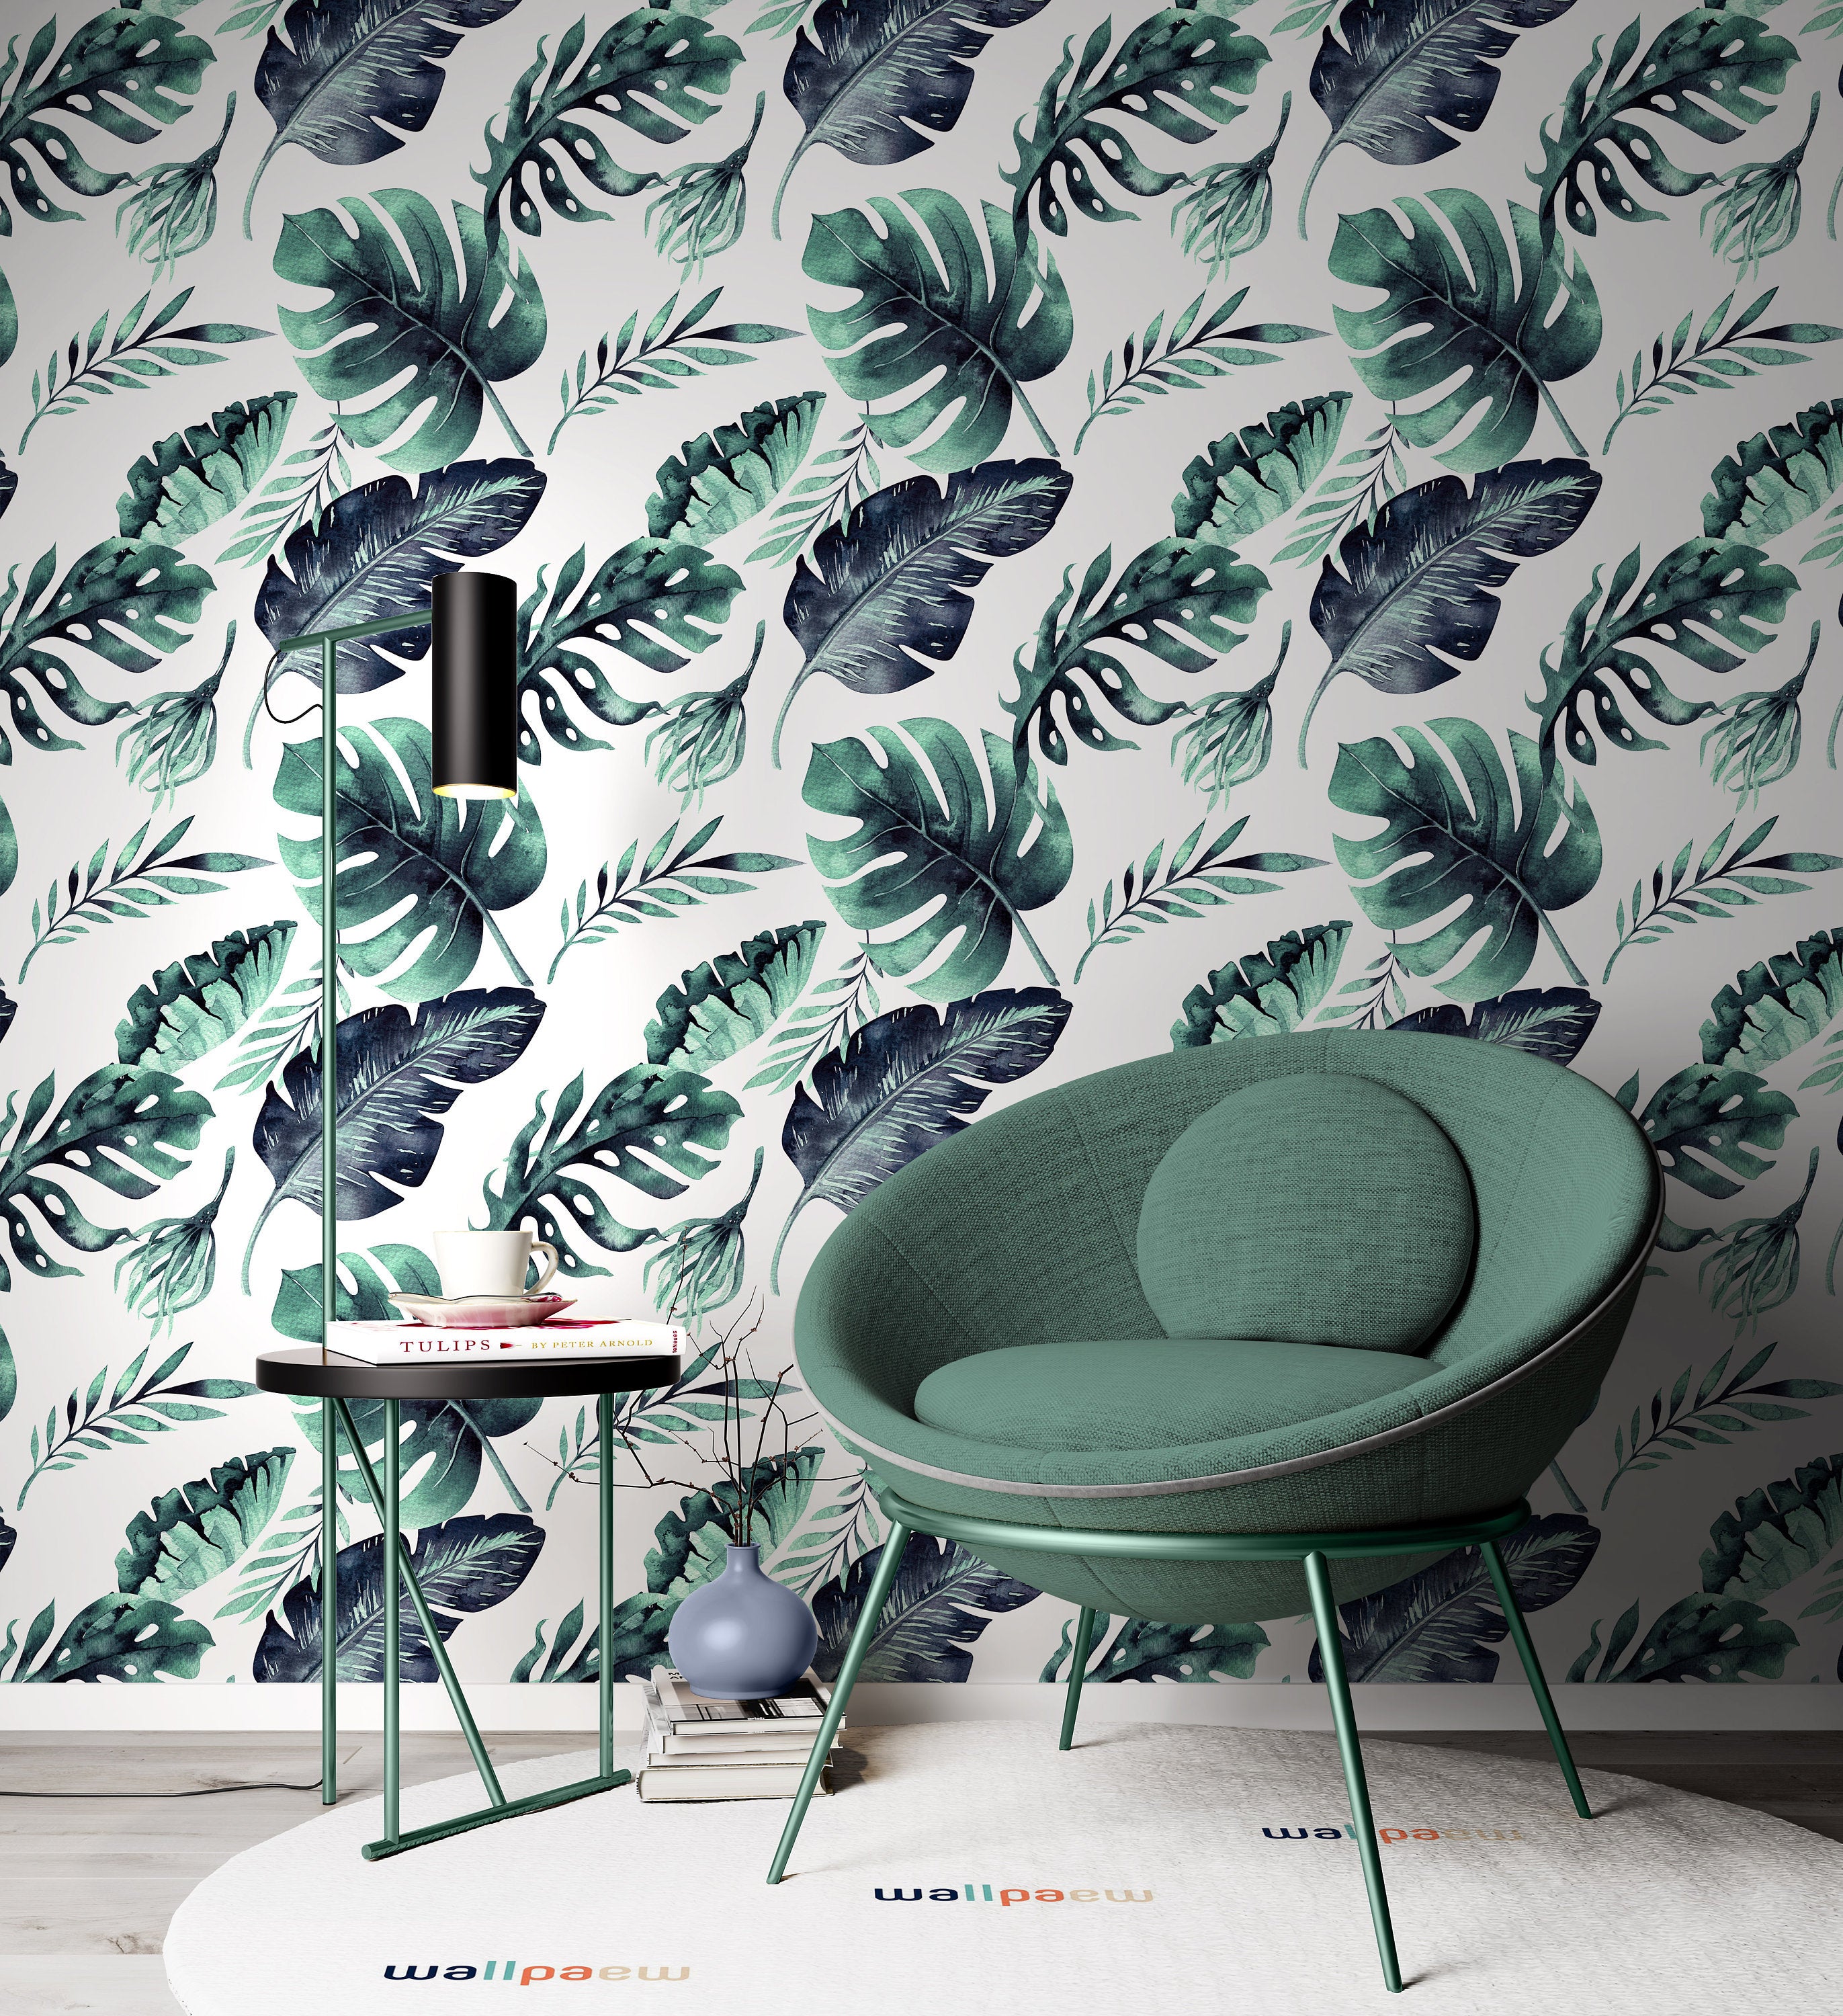 Watercolor Tropical Exotic Leaves Flowers Floral Modern Background Wallpaper Restaurant Living Room Cafe Office Bedroom Mural Home Wall Art